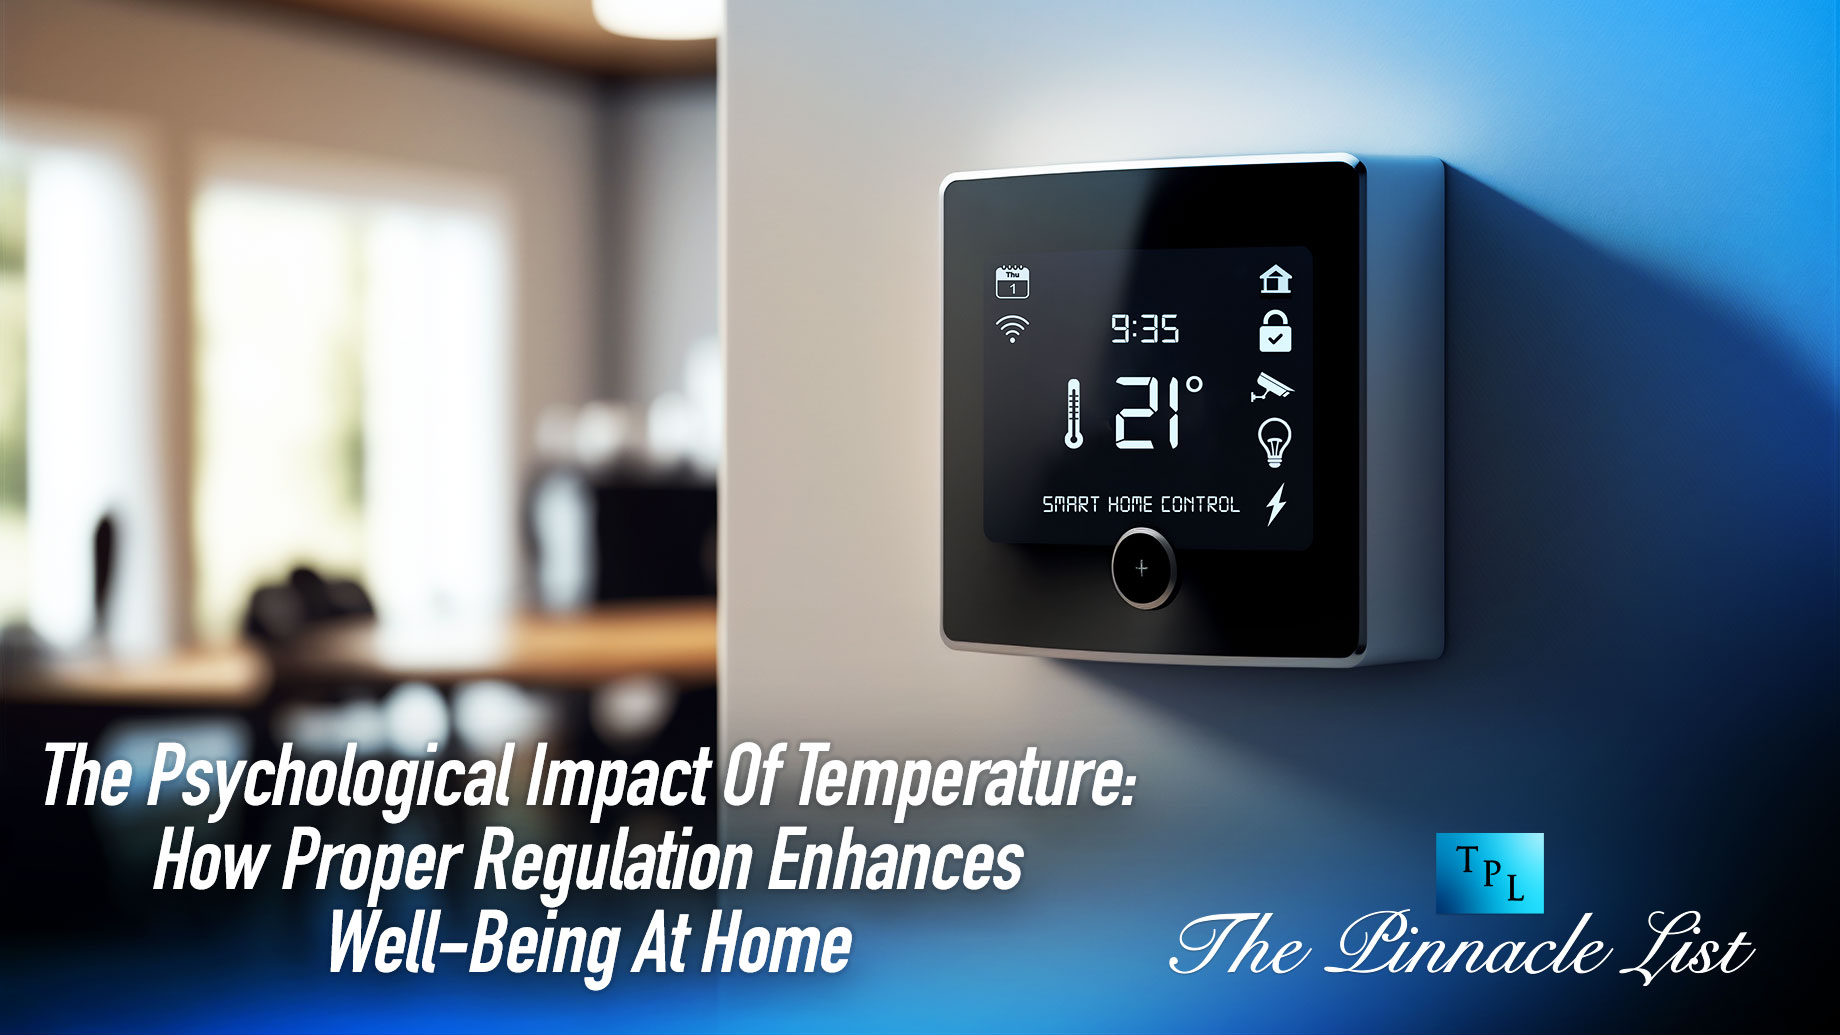 The Psychological Impact Of Temperature: How Proper Regulation Enhances Well-Being At Home